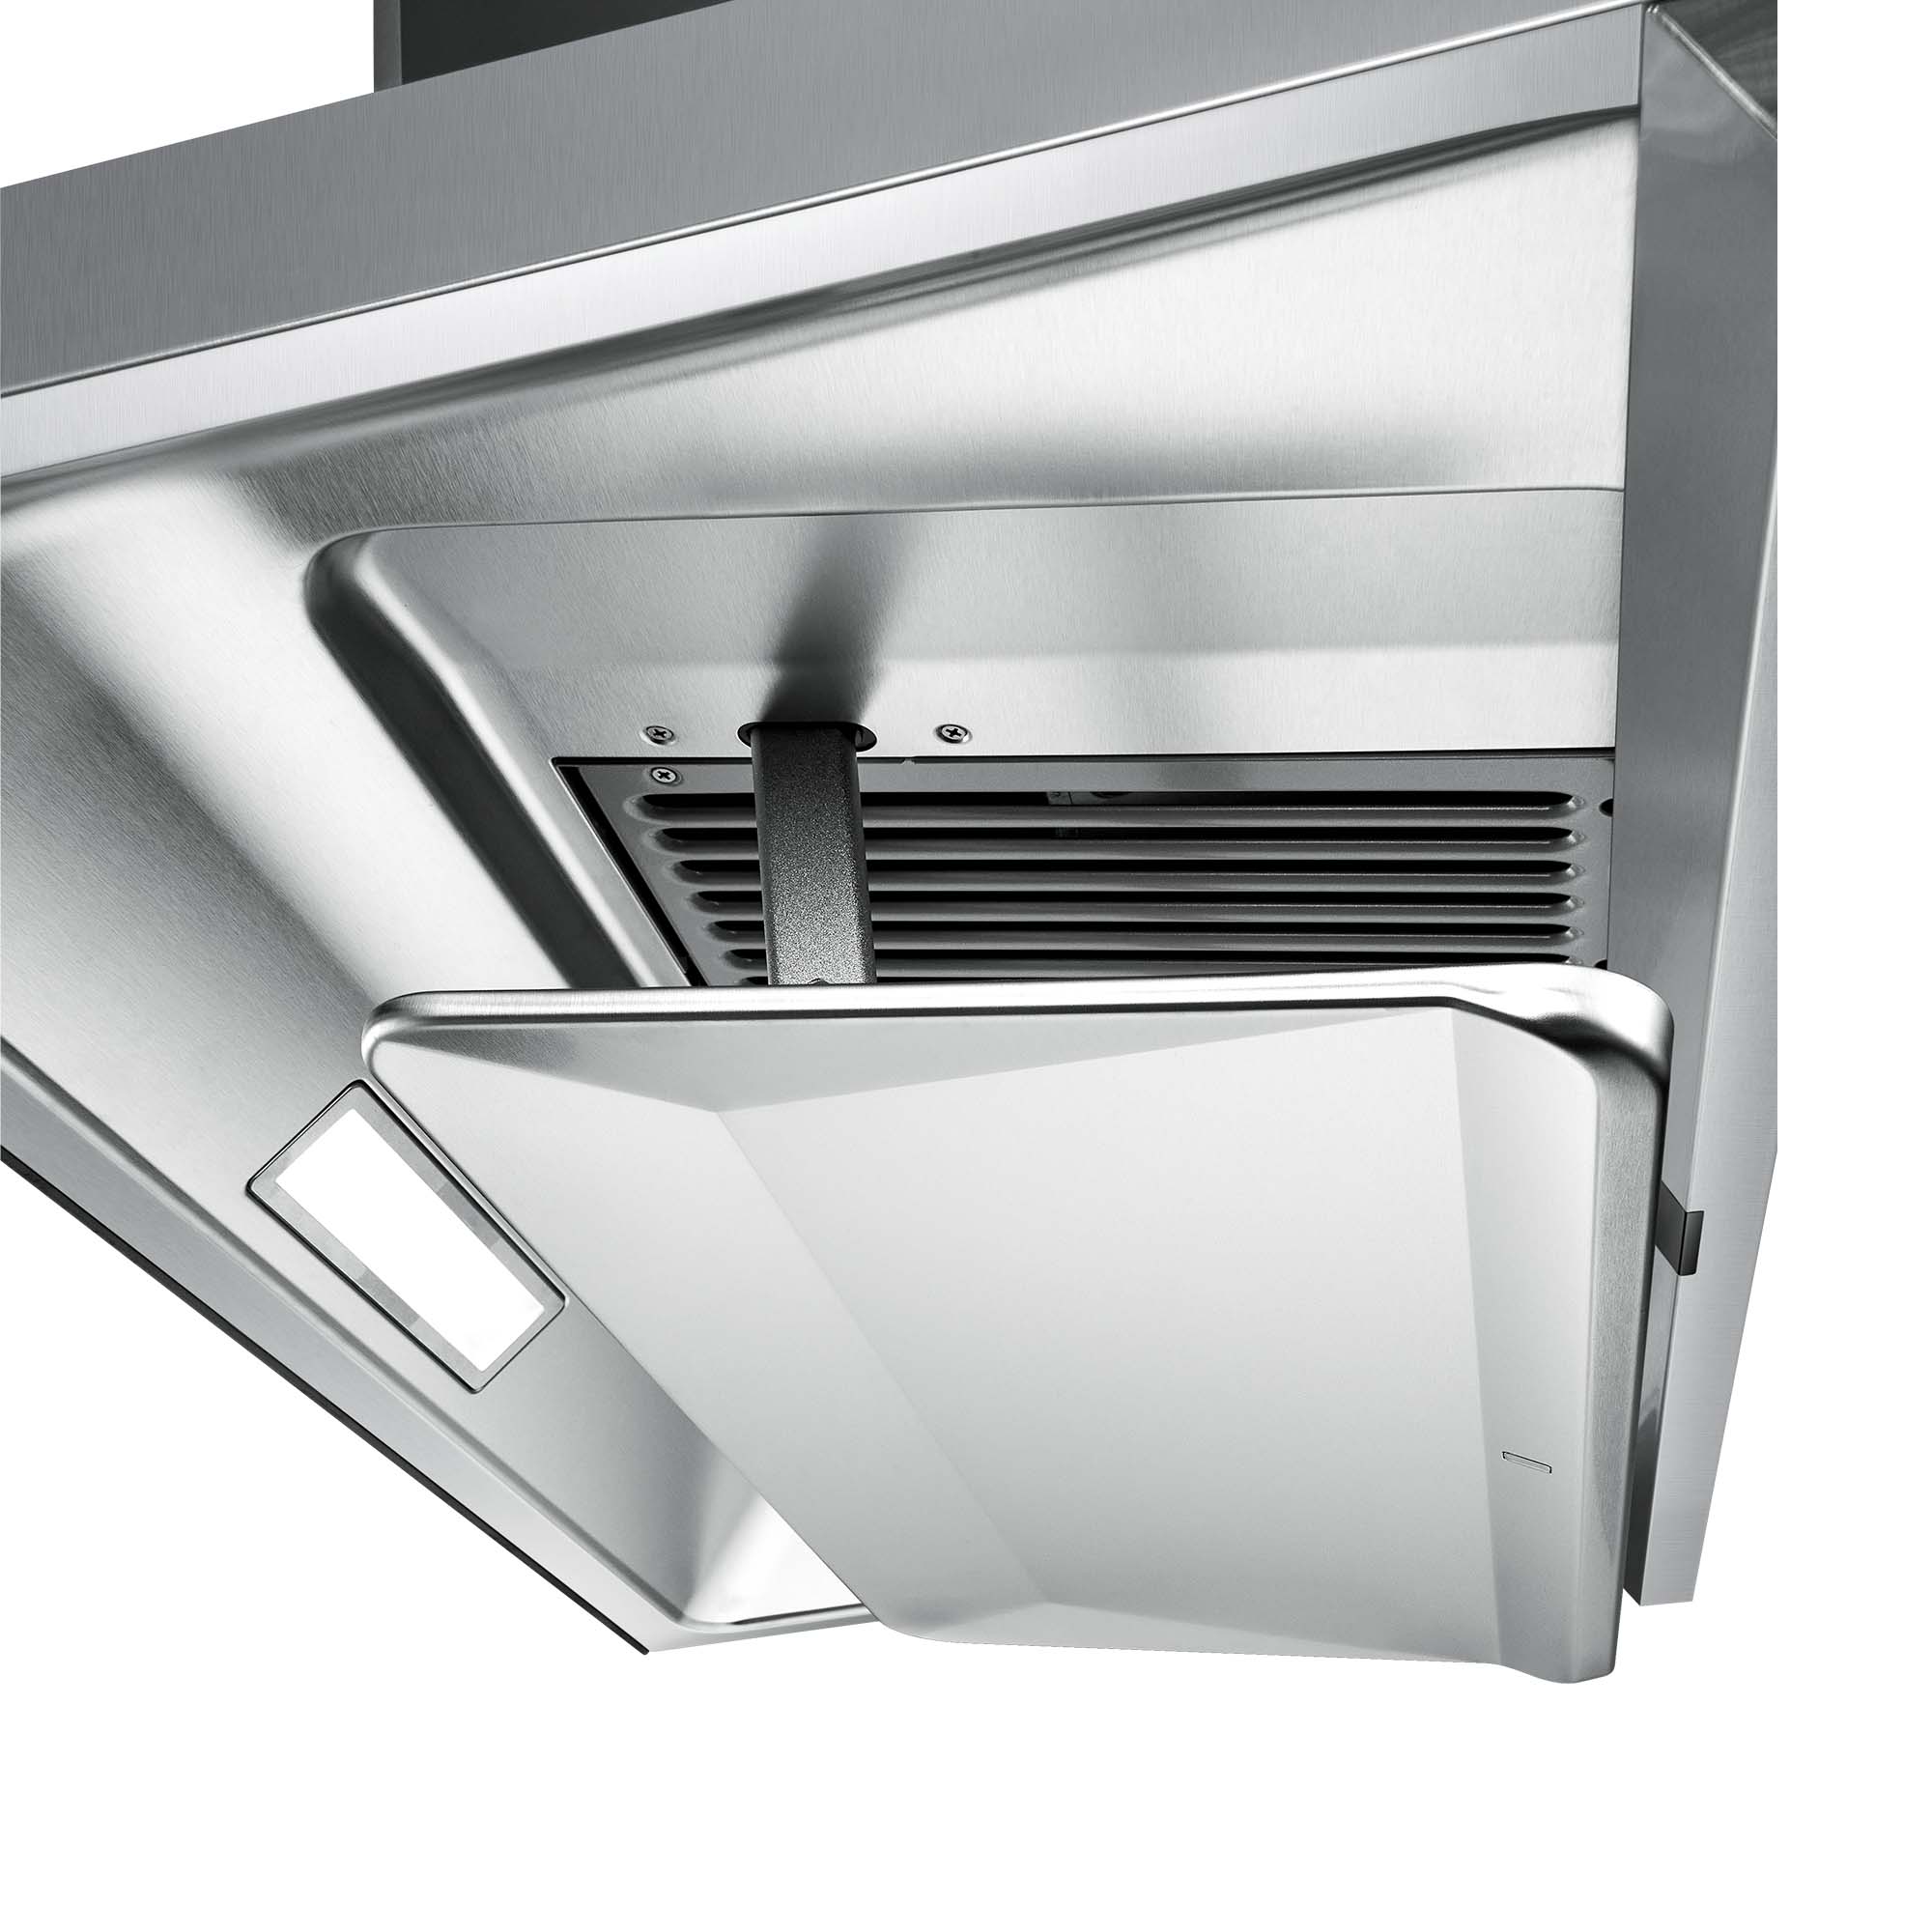  FOTILE EMS9026 36 Wall-mount Range Hood 1000 CFMs with  Touchscreen, 2 Speed-settings and Auto Turbo Mode, Manual-adjustable  Capture Shield Technology